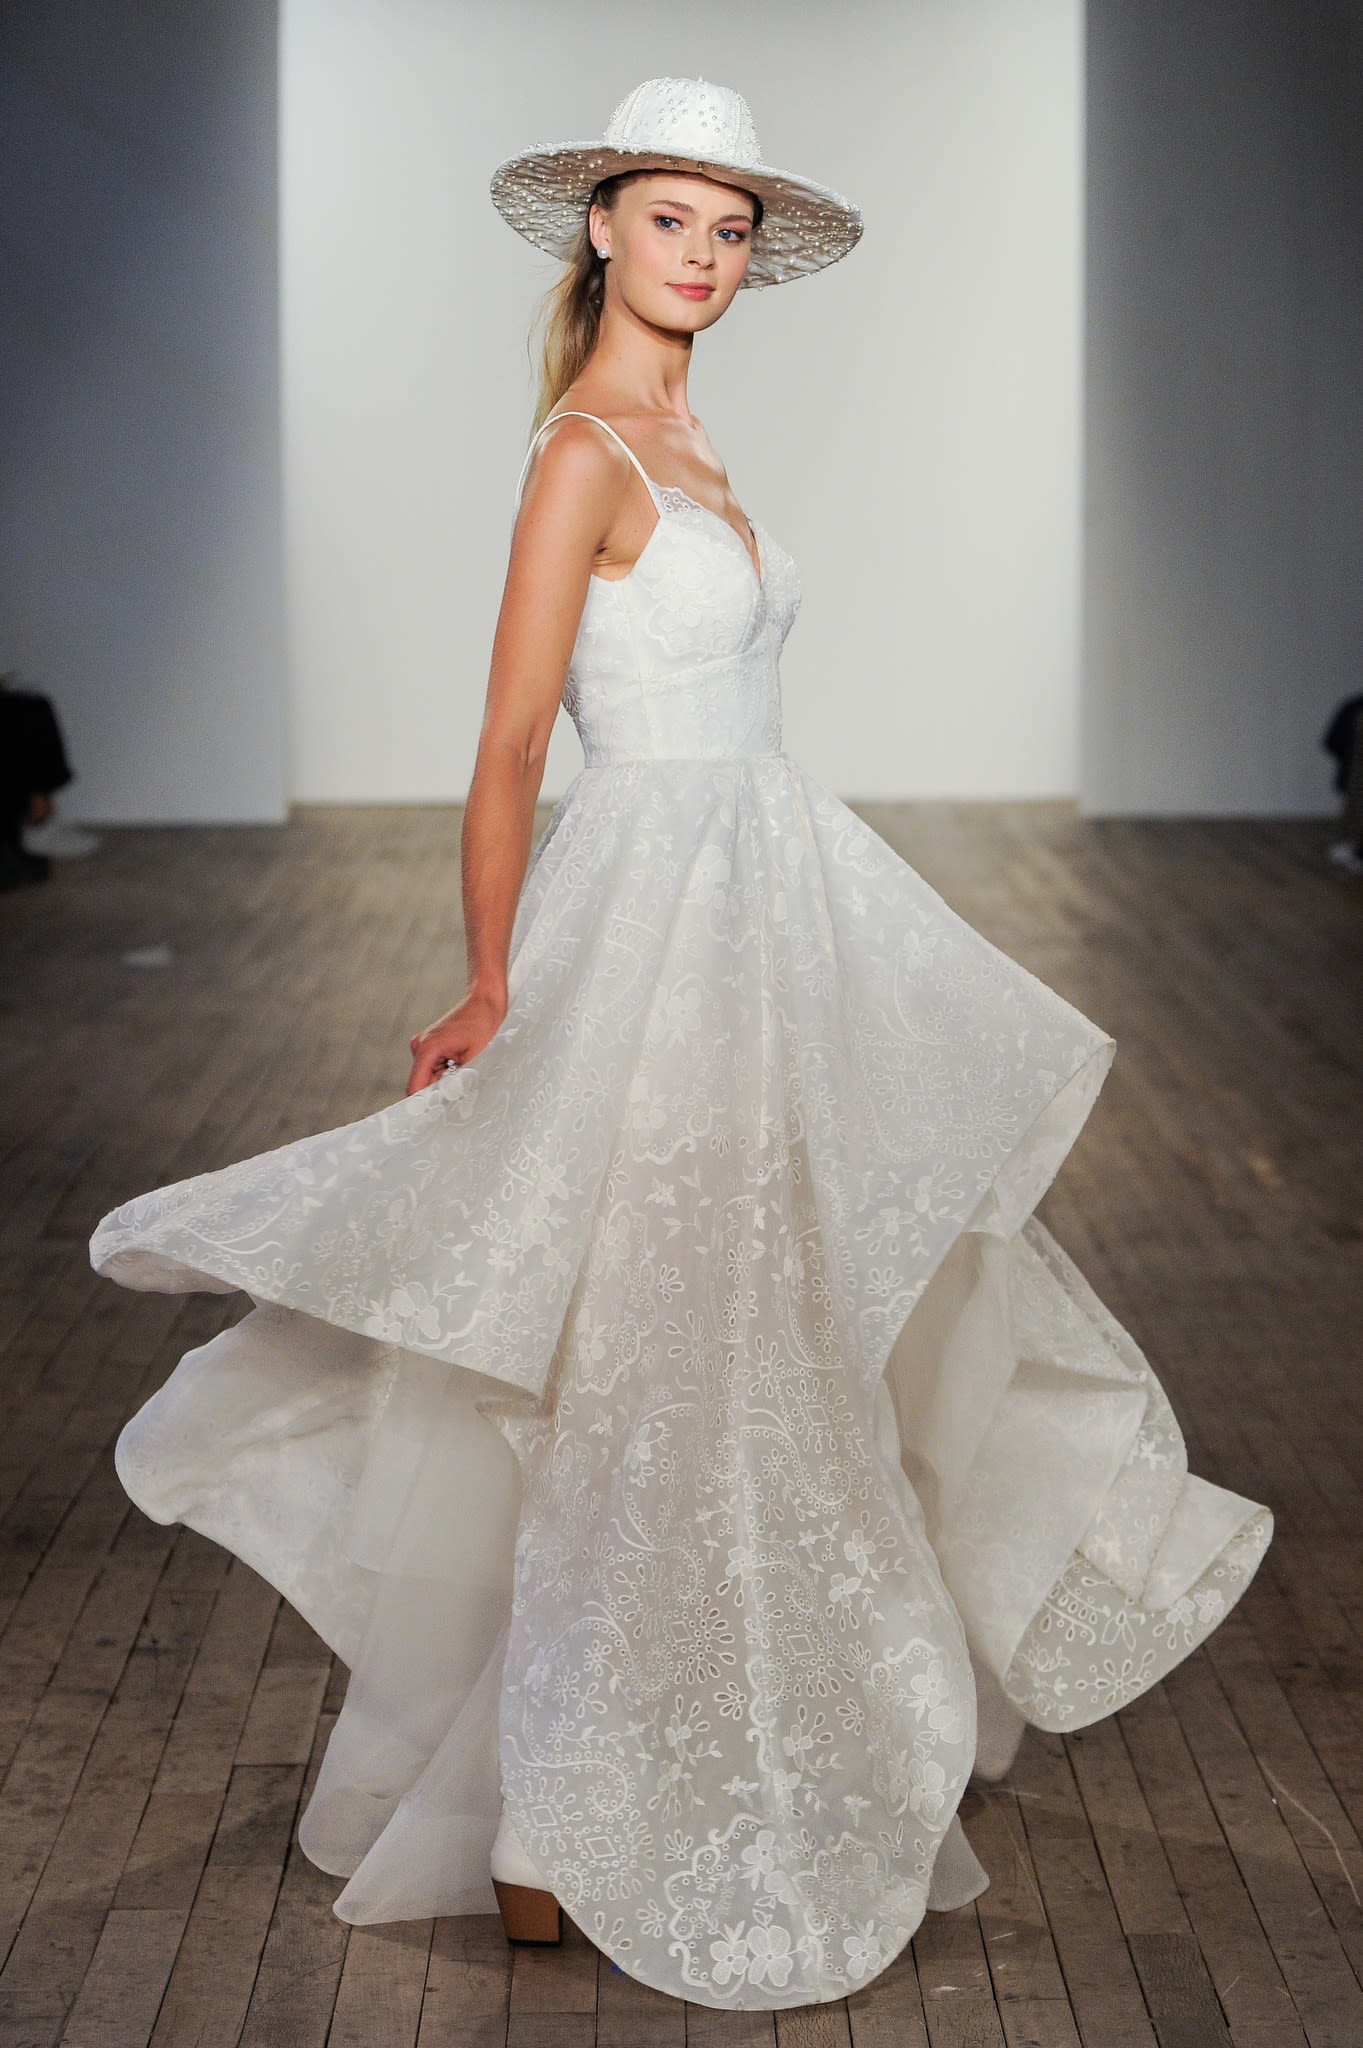 Social Media-Savvy Bridal Designer Hayley Paige Gutman and JLM Couture Settle Lawsuit